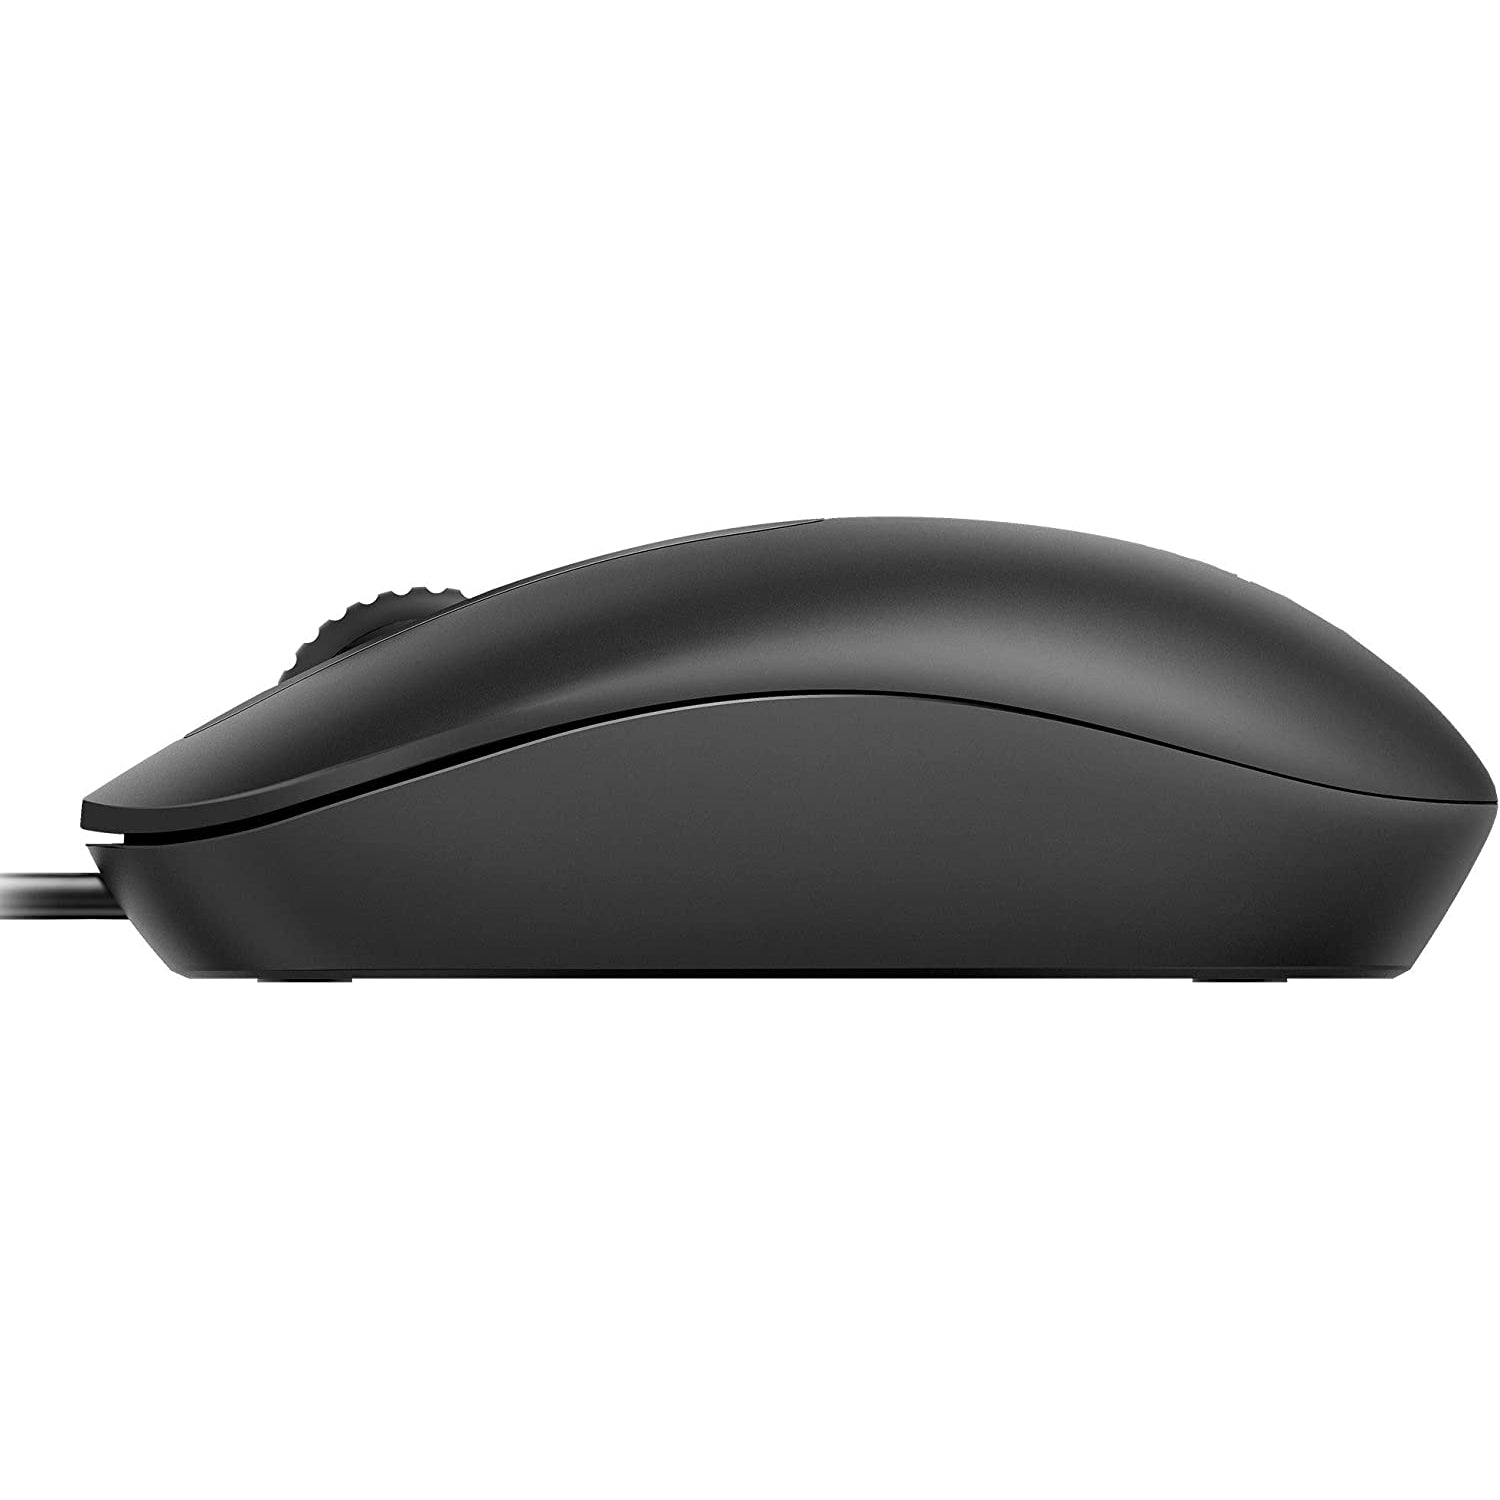 Rapoo N200 Wired Optical Silent Mouse